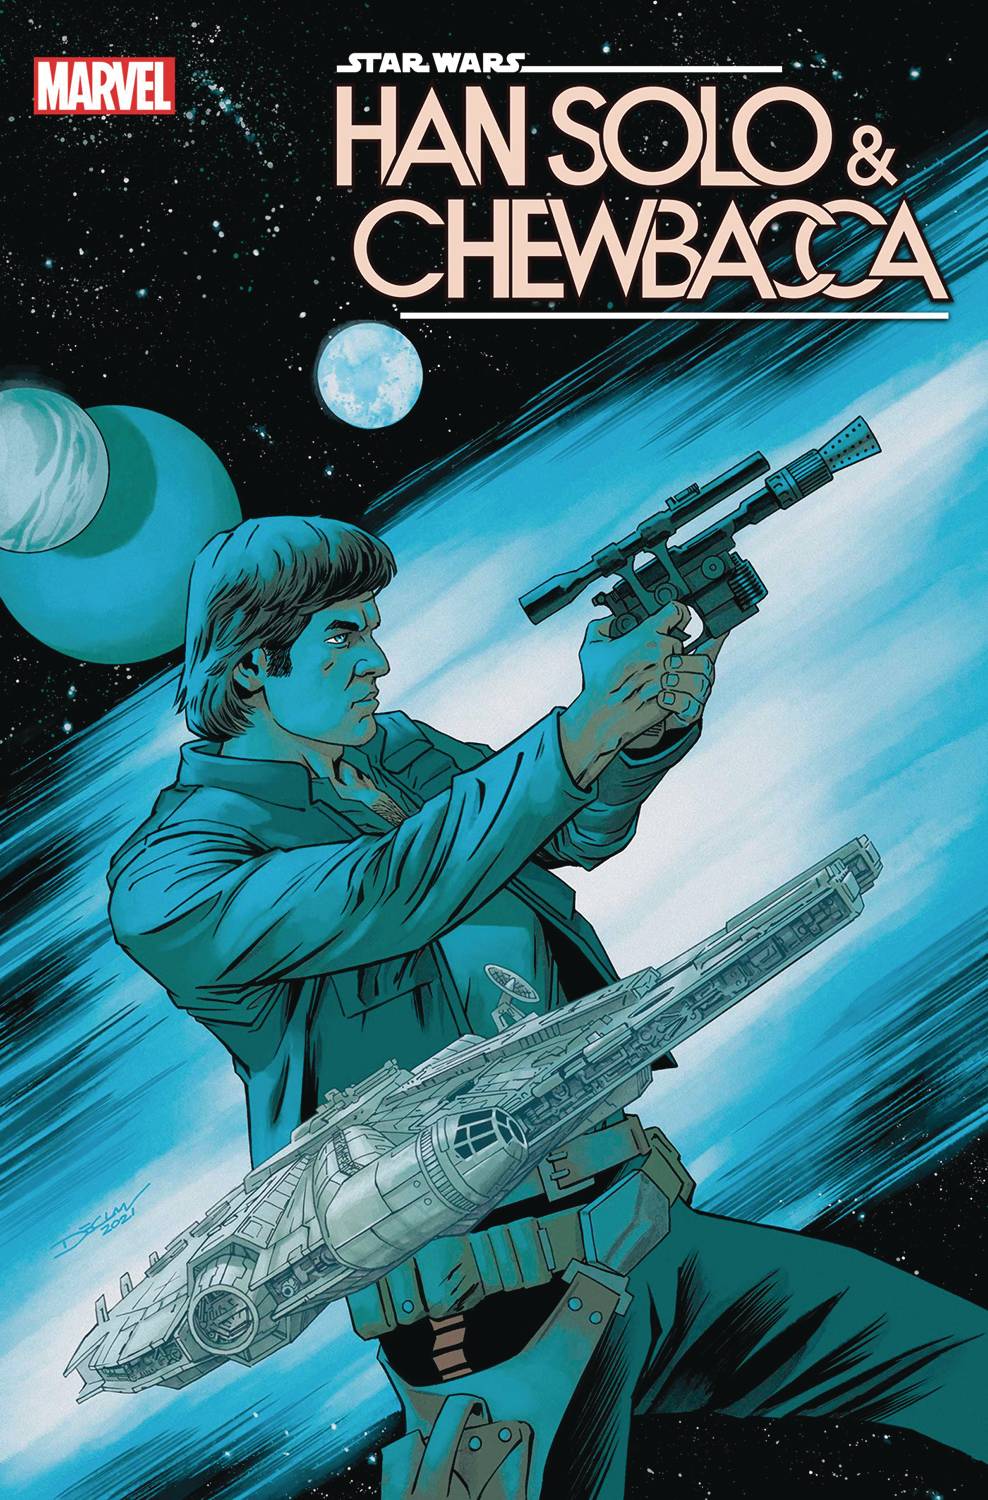 STAR WARS: HAN SOLO & CHEWBACCA #1 SHALVEY COVER